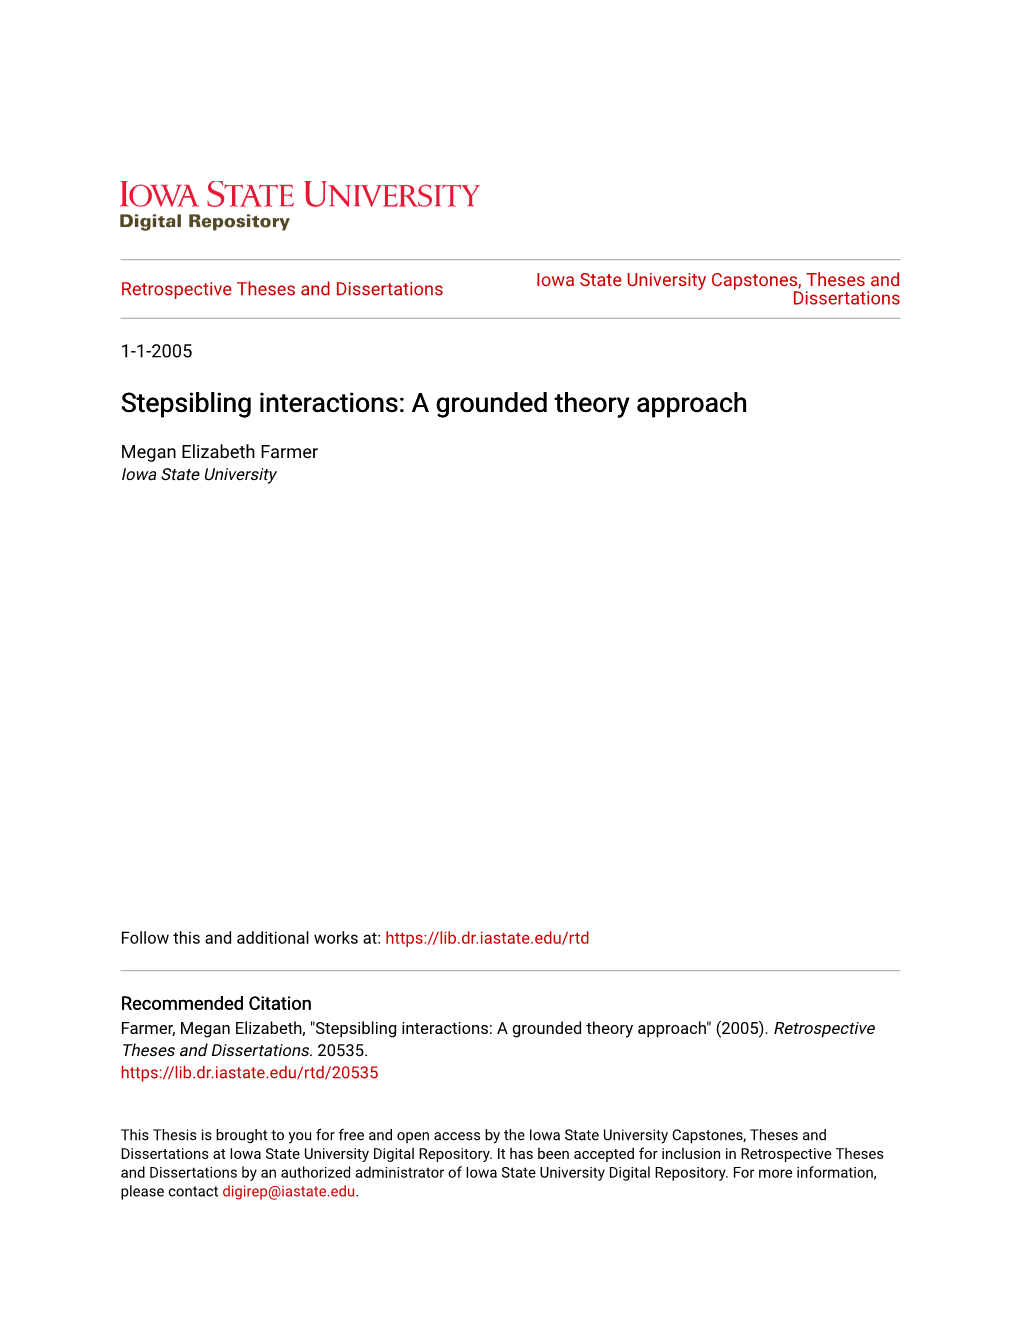 stepsibling-interactions-a-grounded-theory-approach-docslib